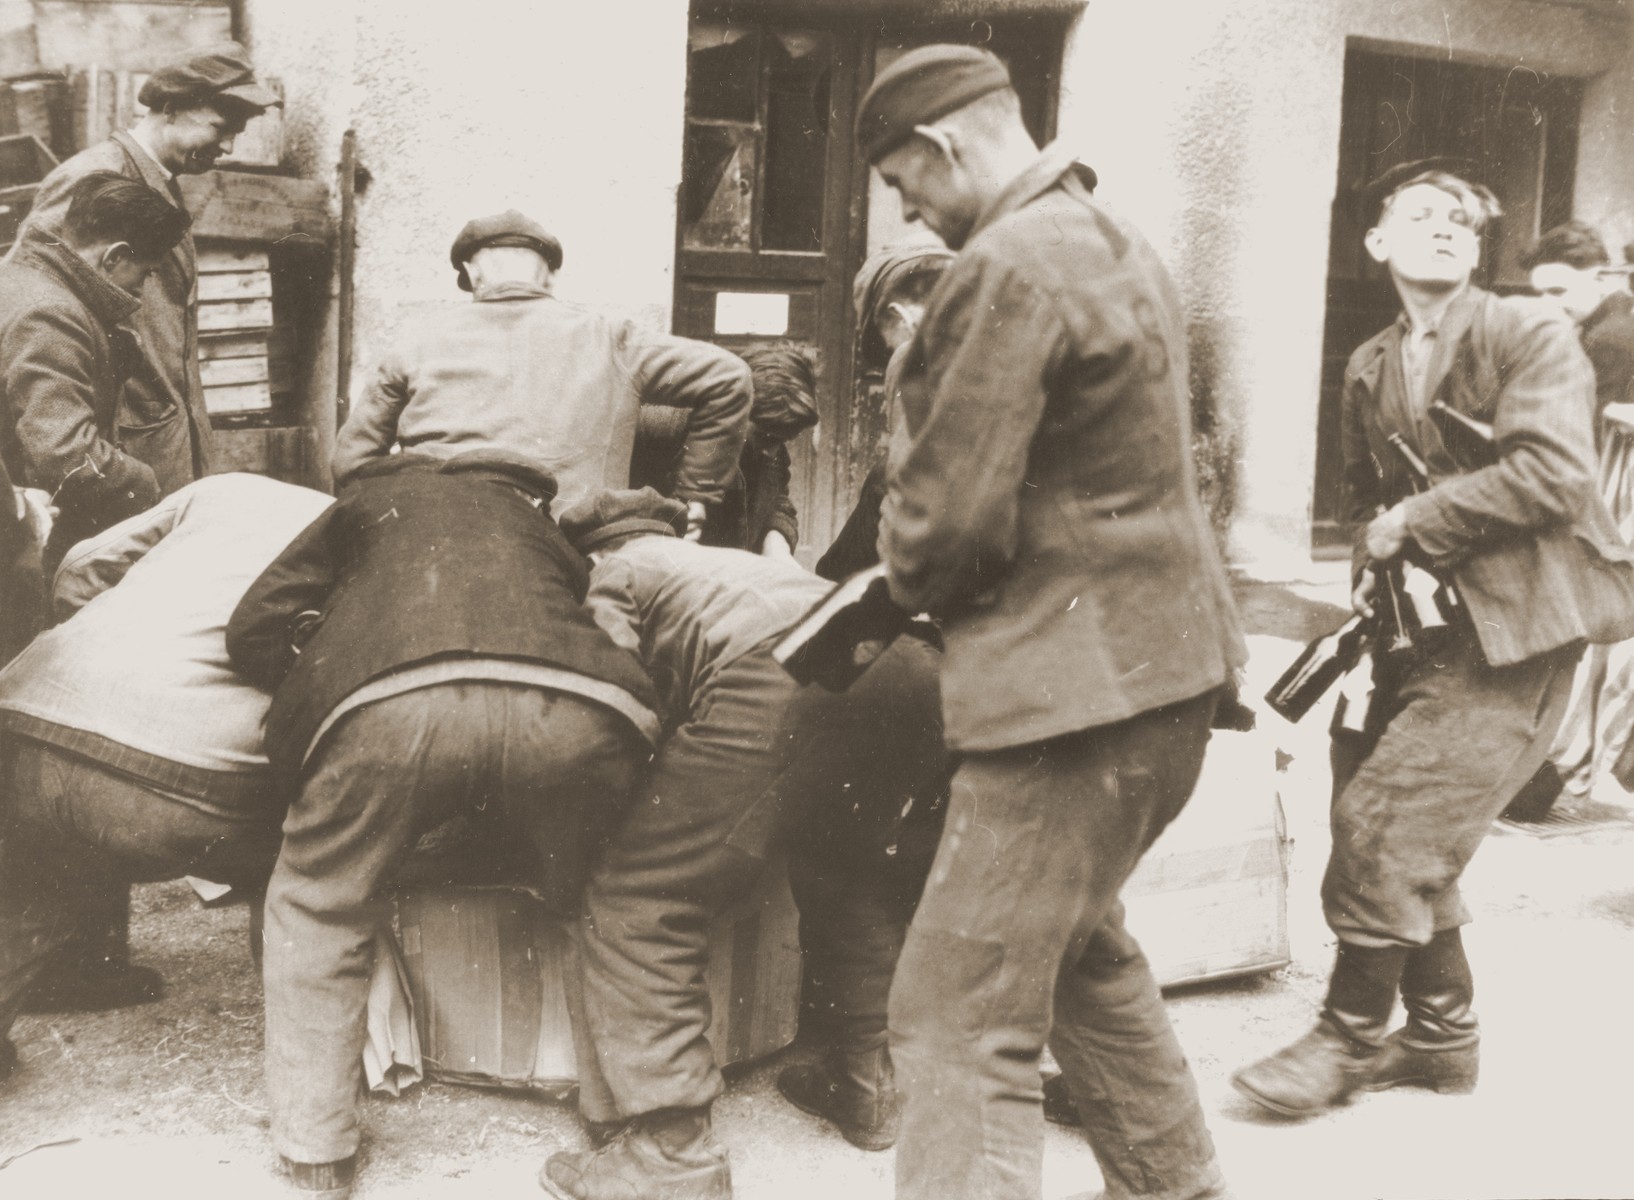 Liberated concentration camp prisoners loot food and supplies in Munich.